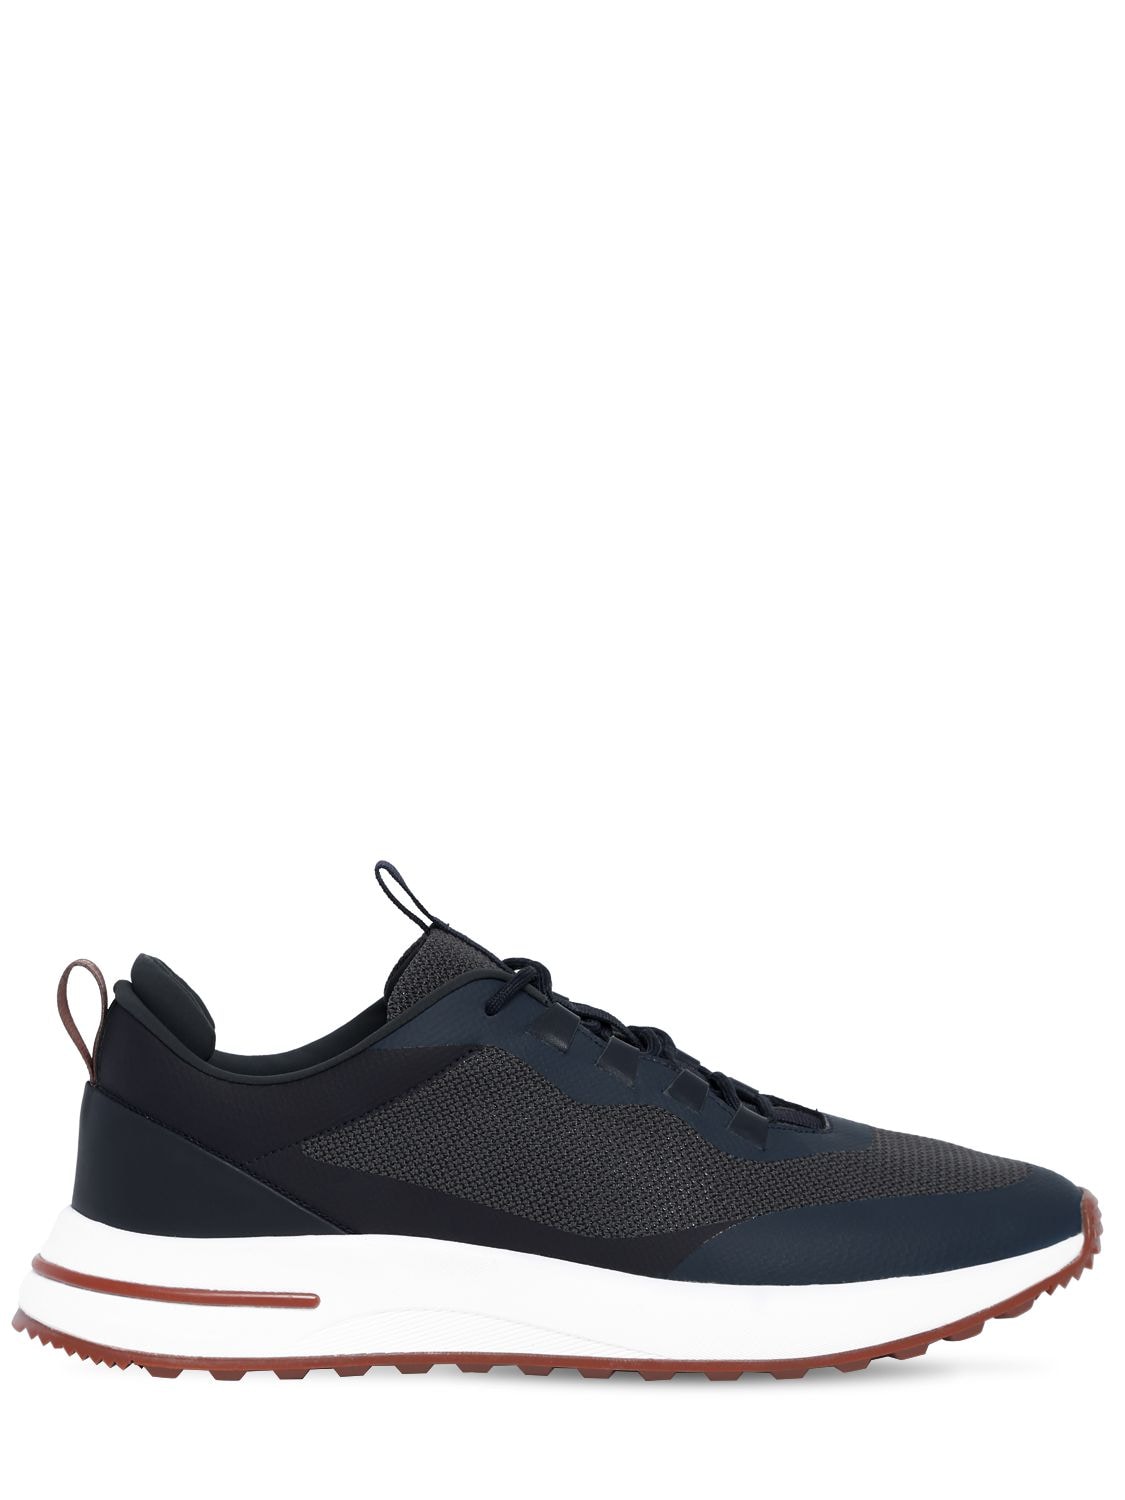 Loro Piana Week_end Walk Technical Mesh Sneakers In Chacoral Blue